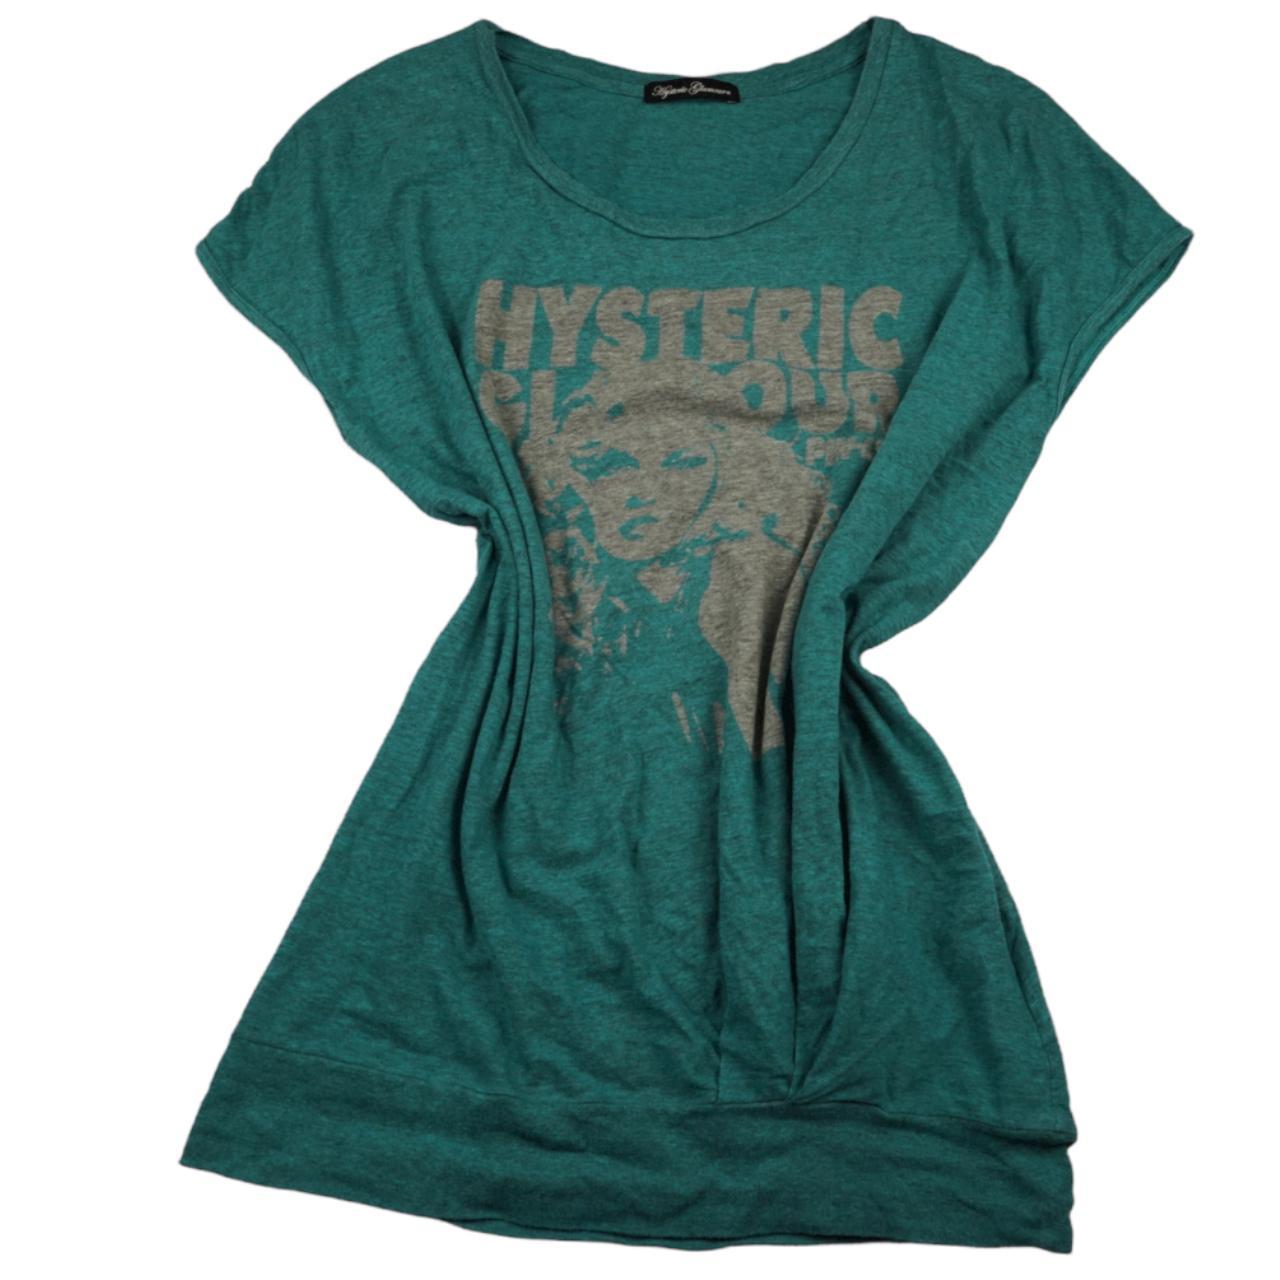 Product Image 1 - Hysteric Glamour Graphic Top

- Blue